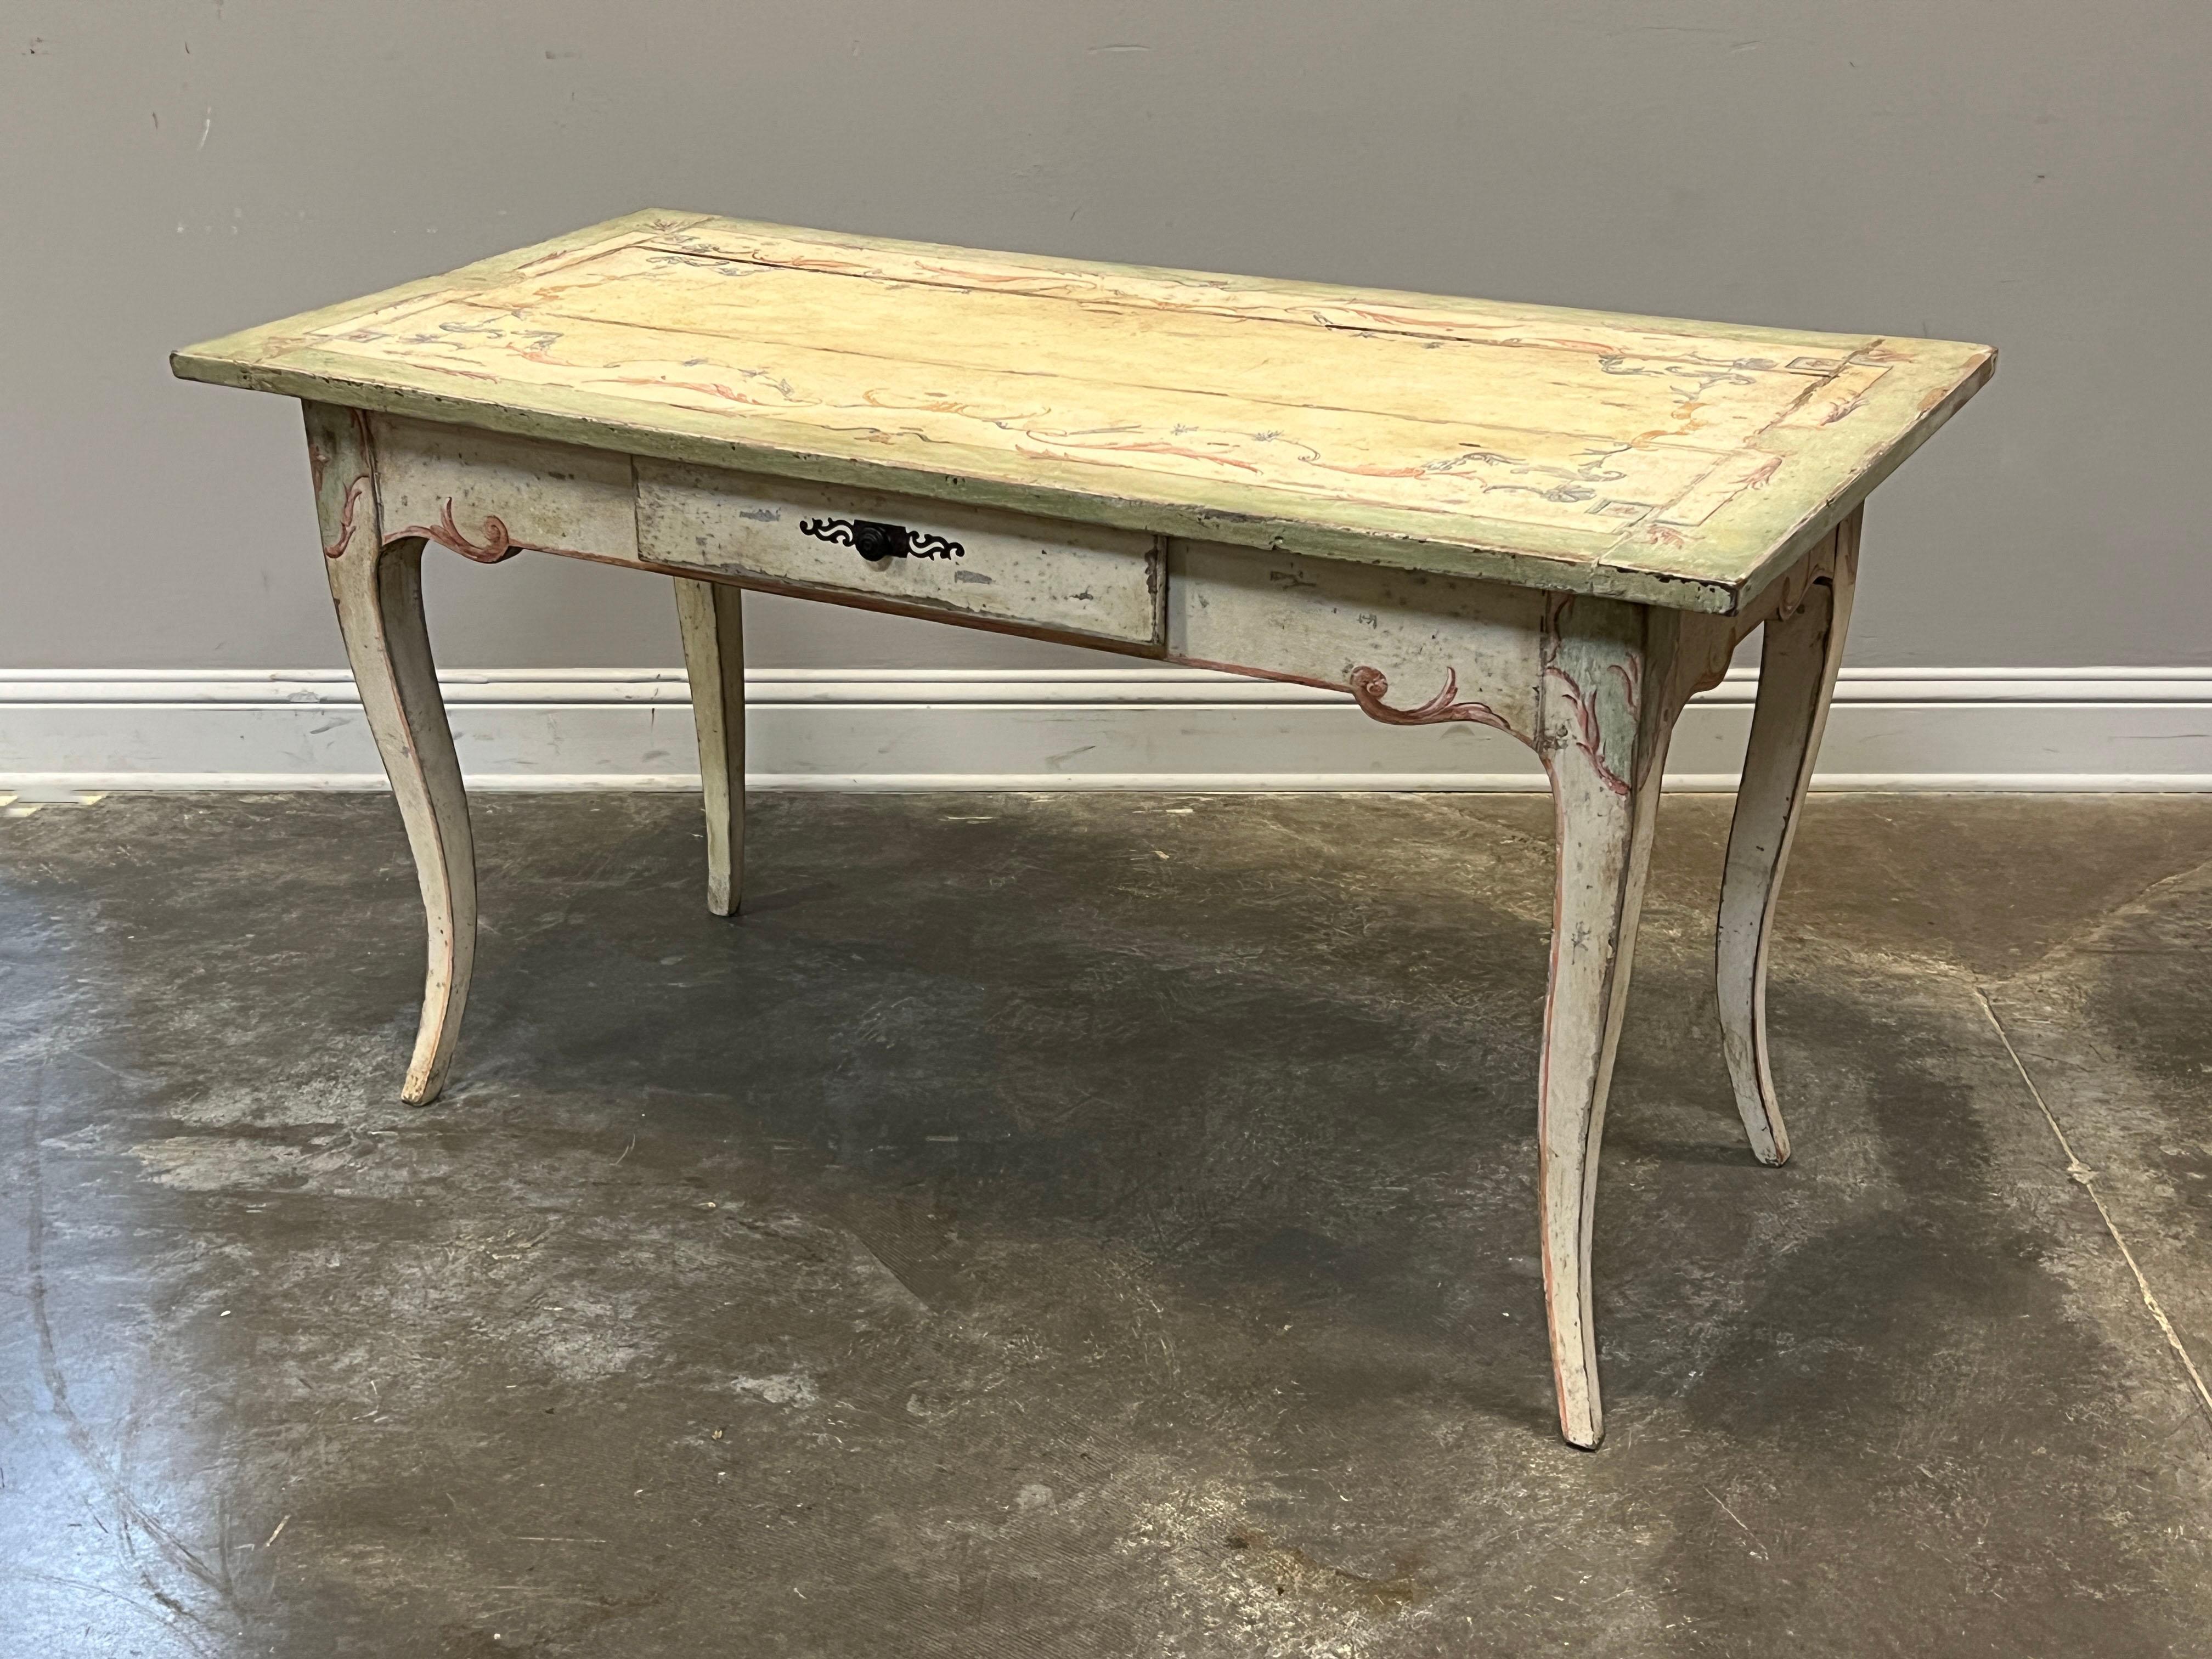 Lovely early interpretation of Louis XV with graceful chambered legs and one drawer. Painted in delicate scroll work, the table is antiqued to a finish appropriate and relative to the age of the desk. Major color is a soft green with cream secondary